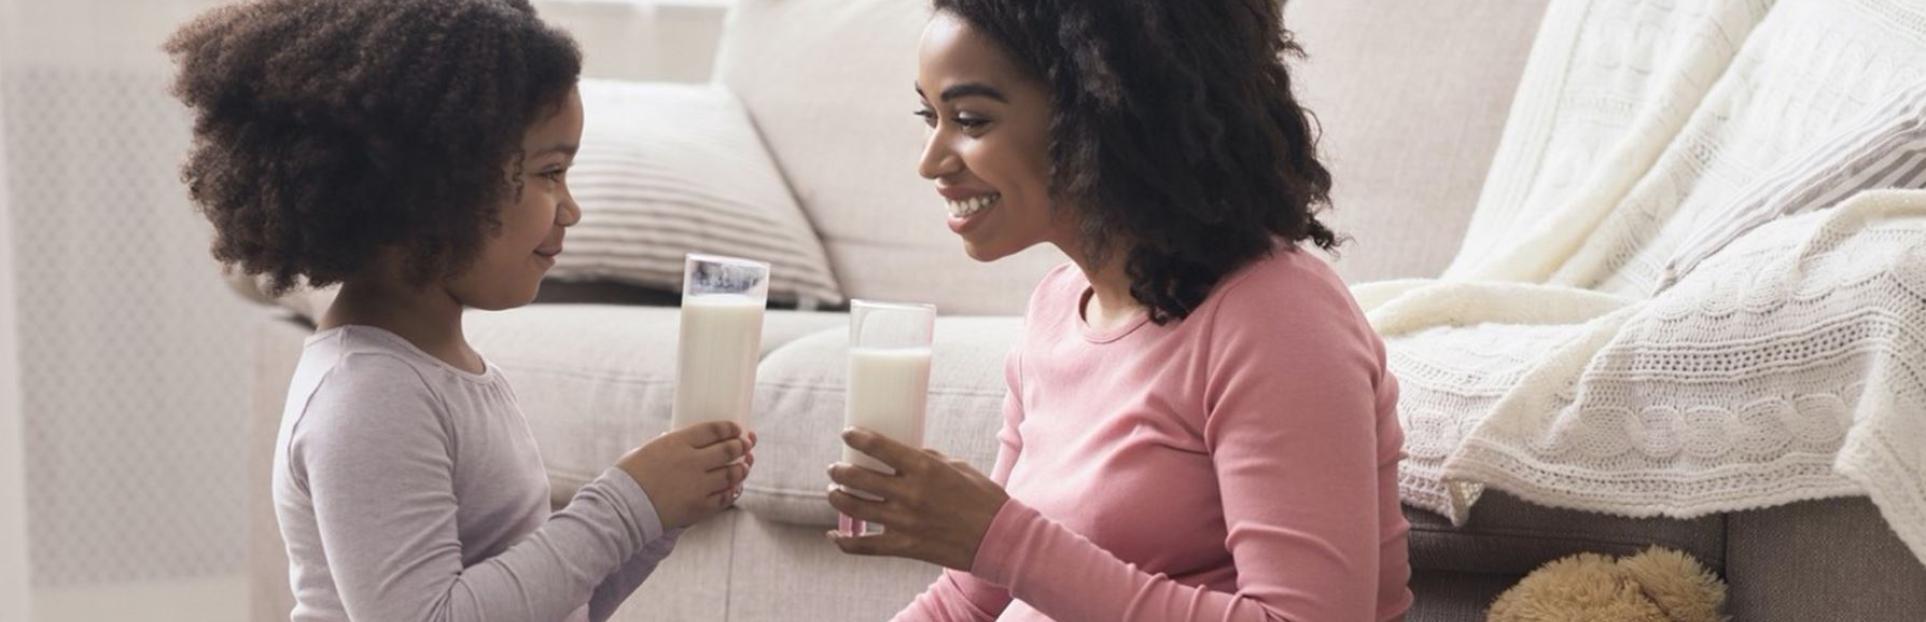 woman drinking milk with kid